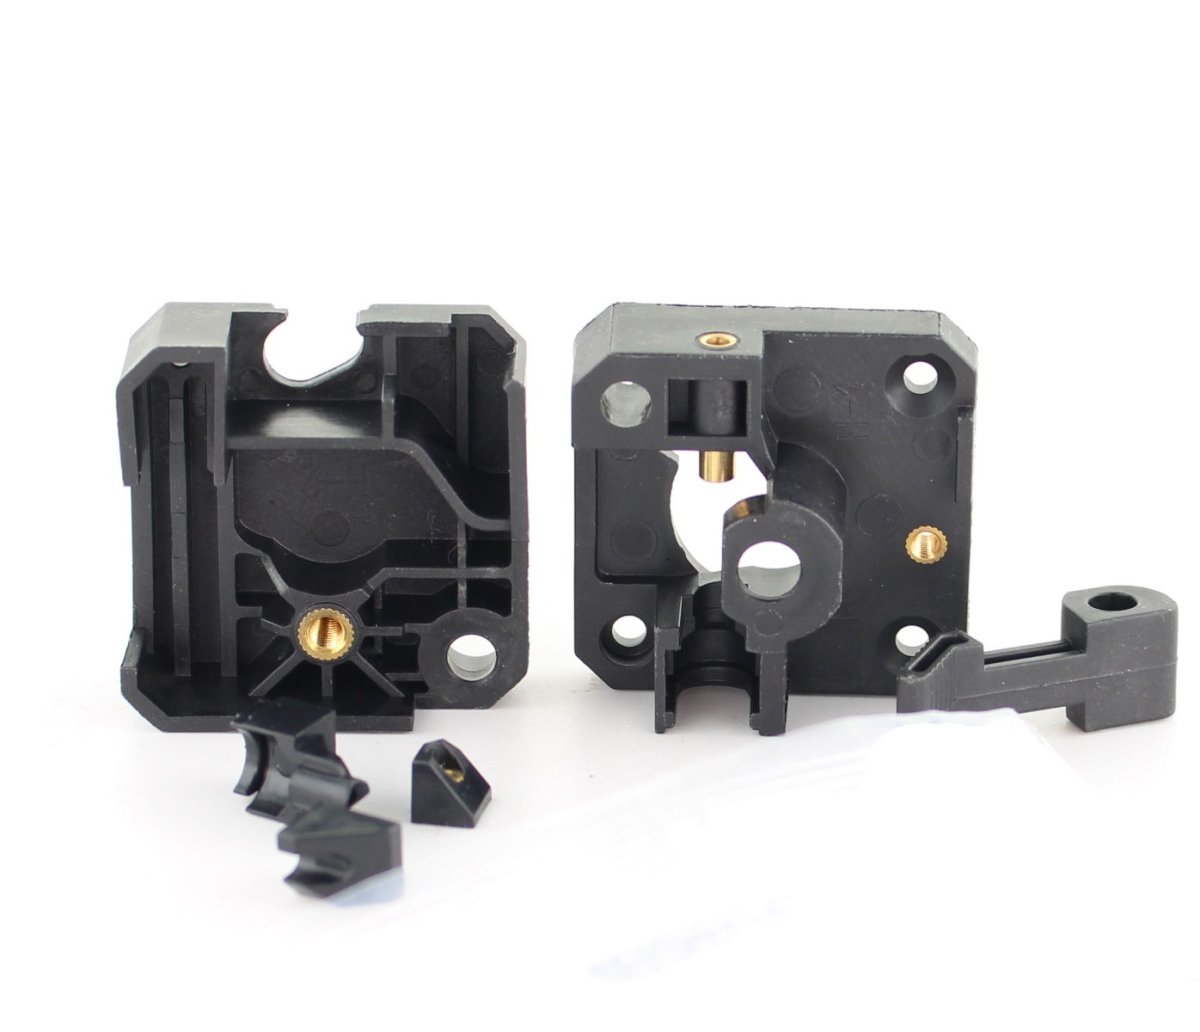 Creality 3D - Cover for Extruder Upgrade Kit w-o Bearings, Screws